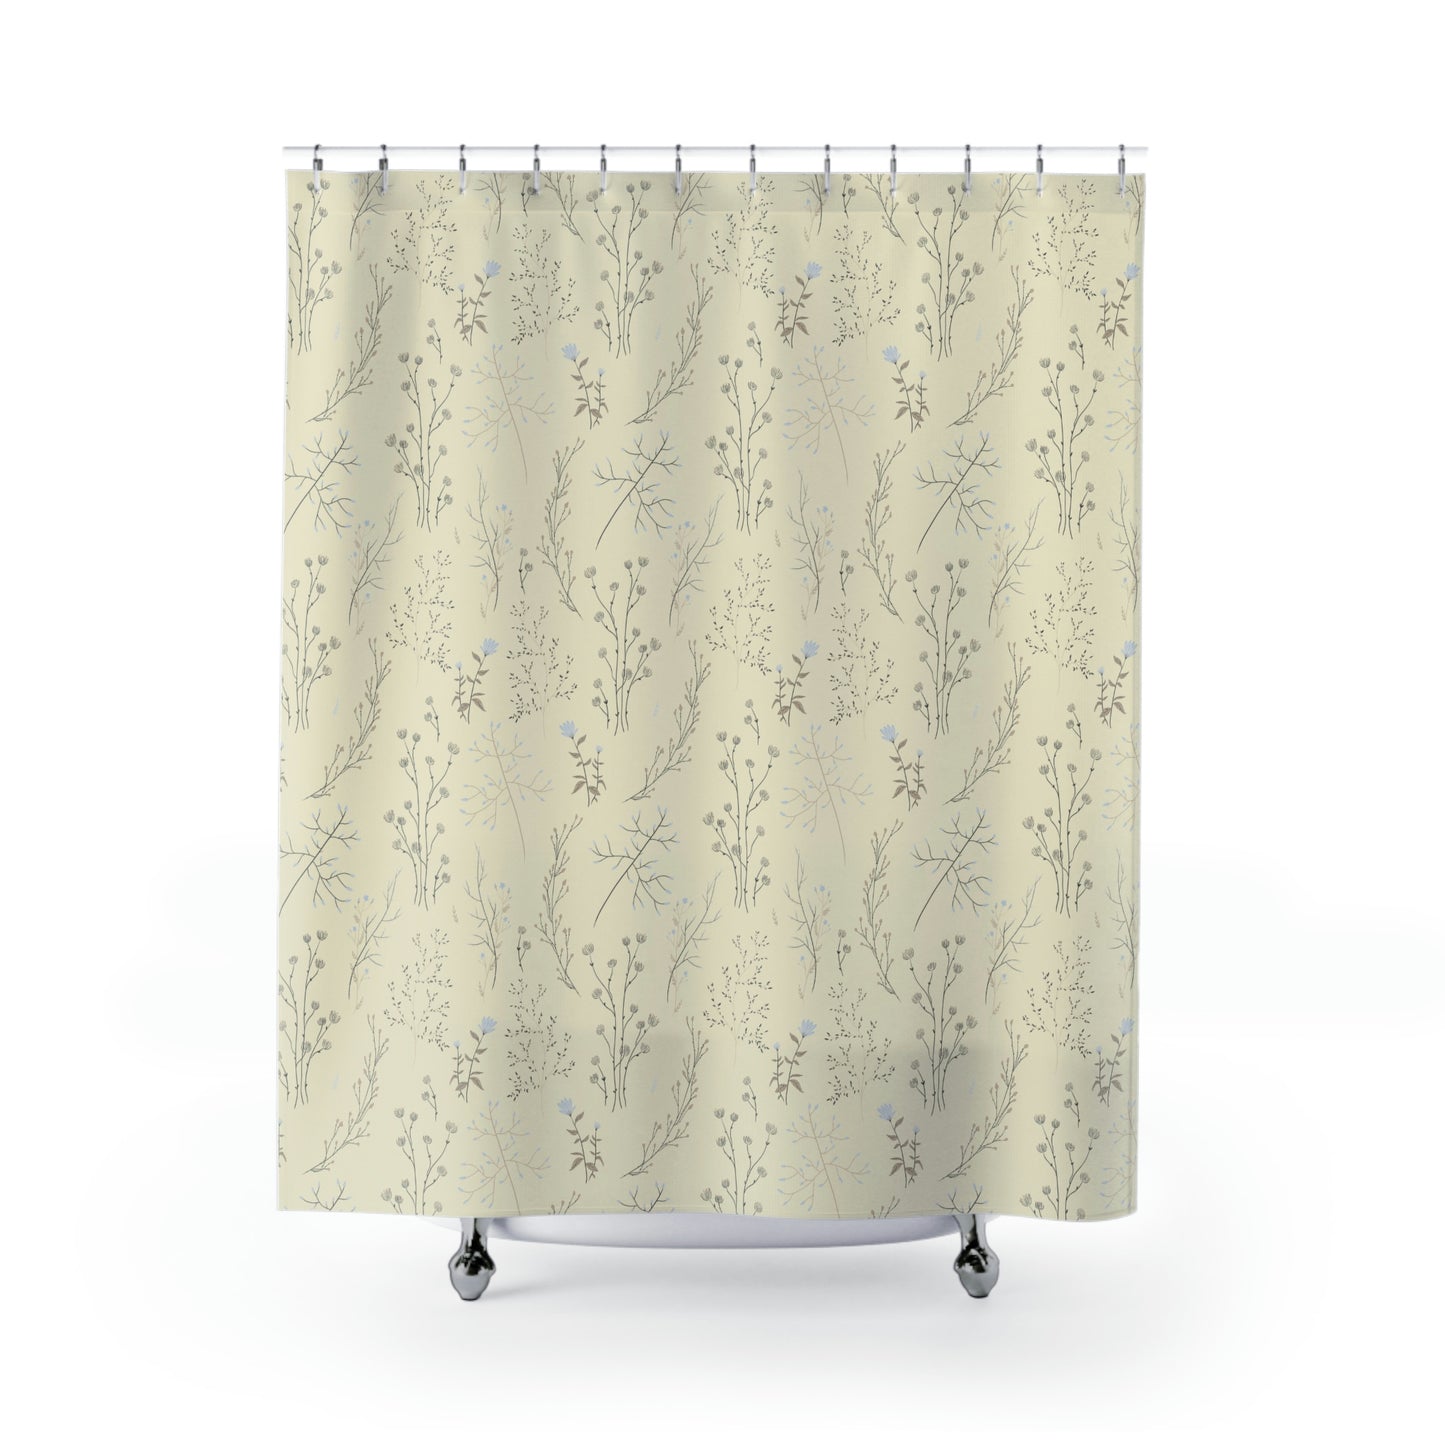 Pretty Pastel Yellow Shower Curtain with Floral Motif